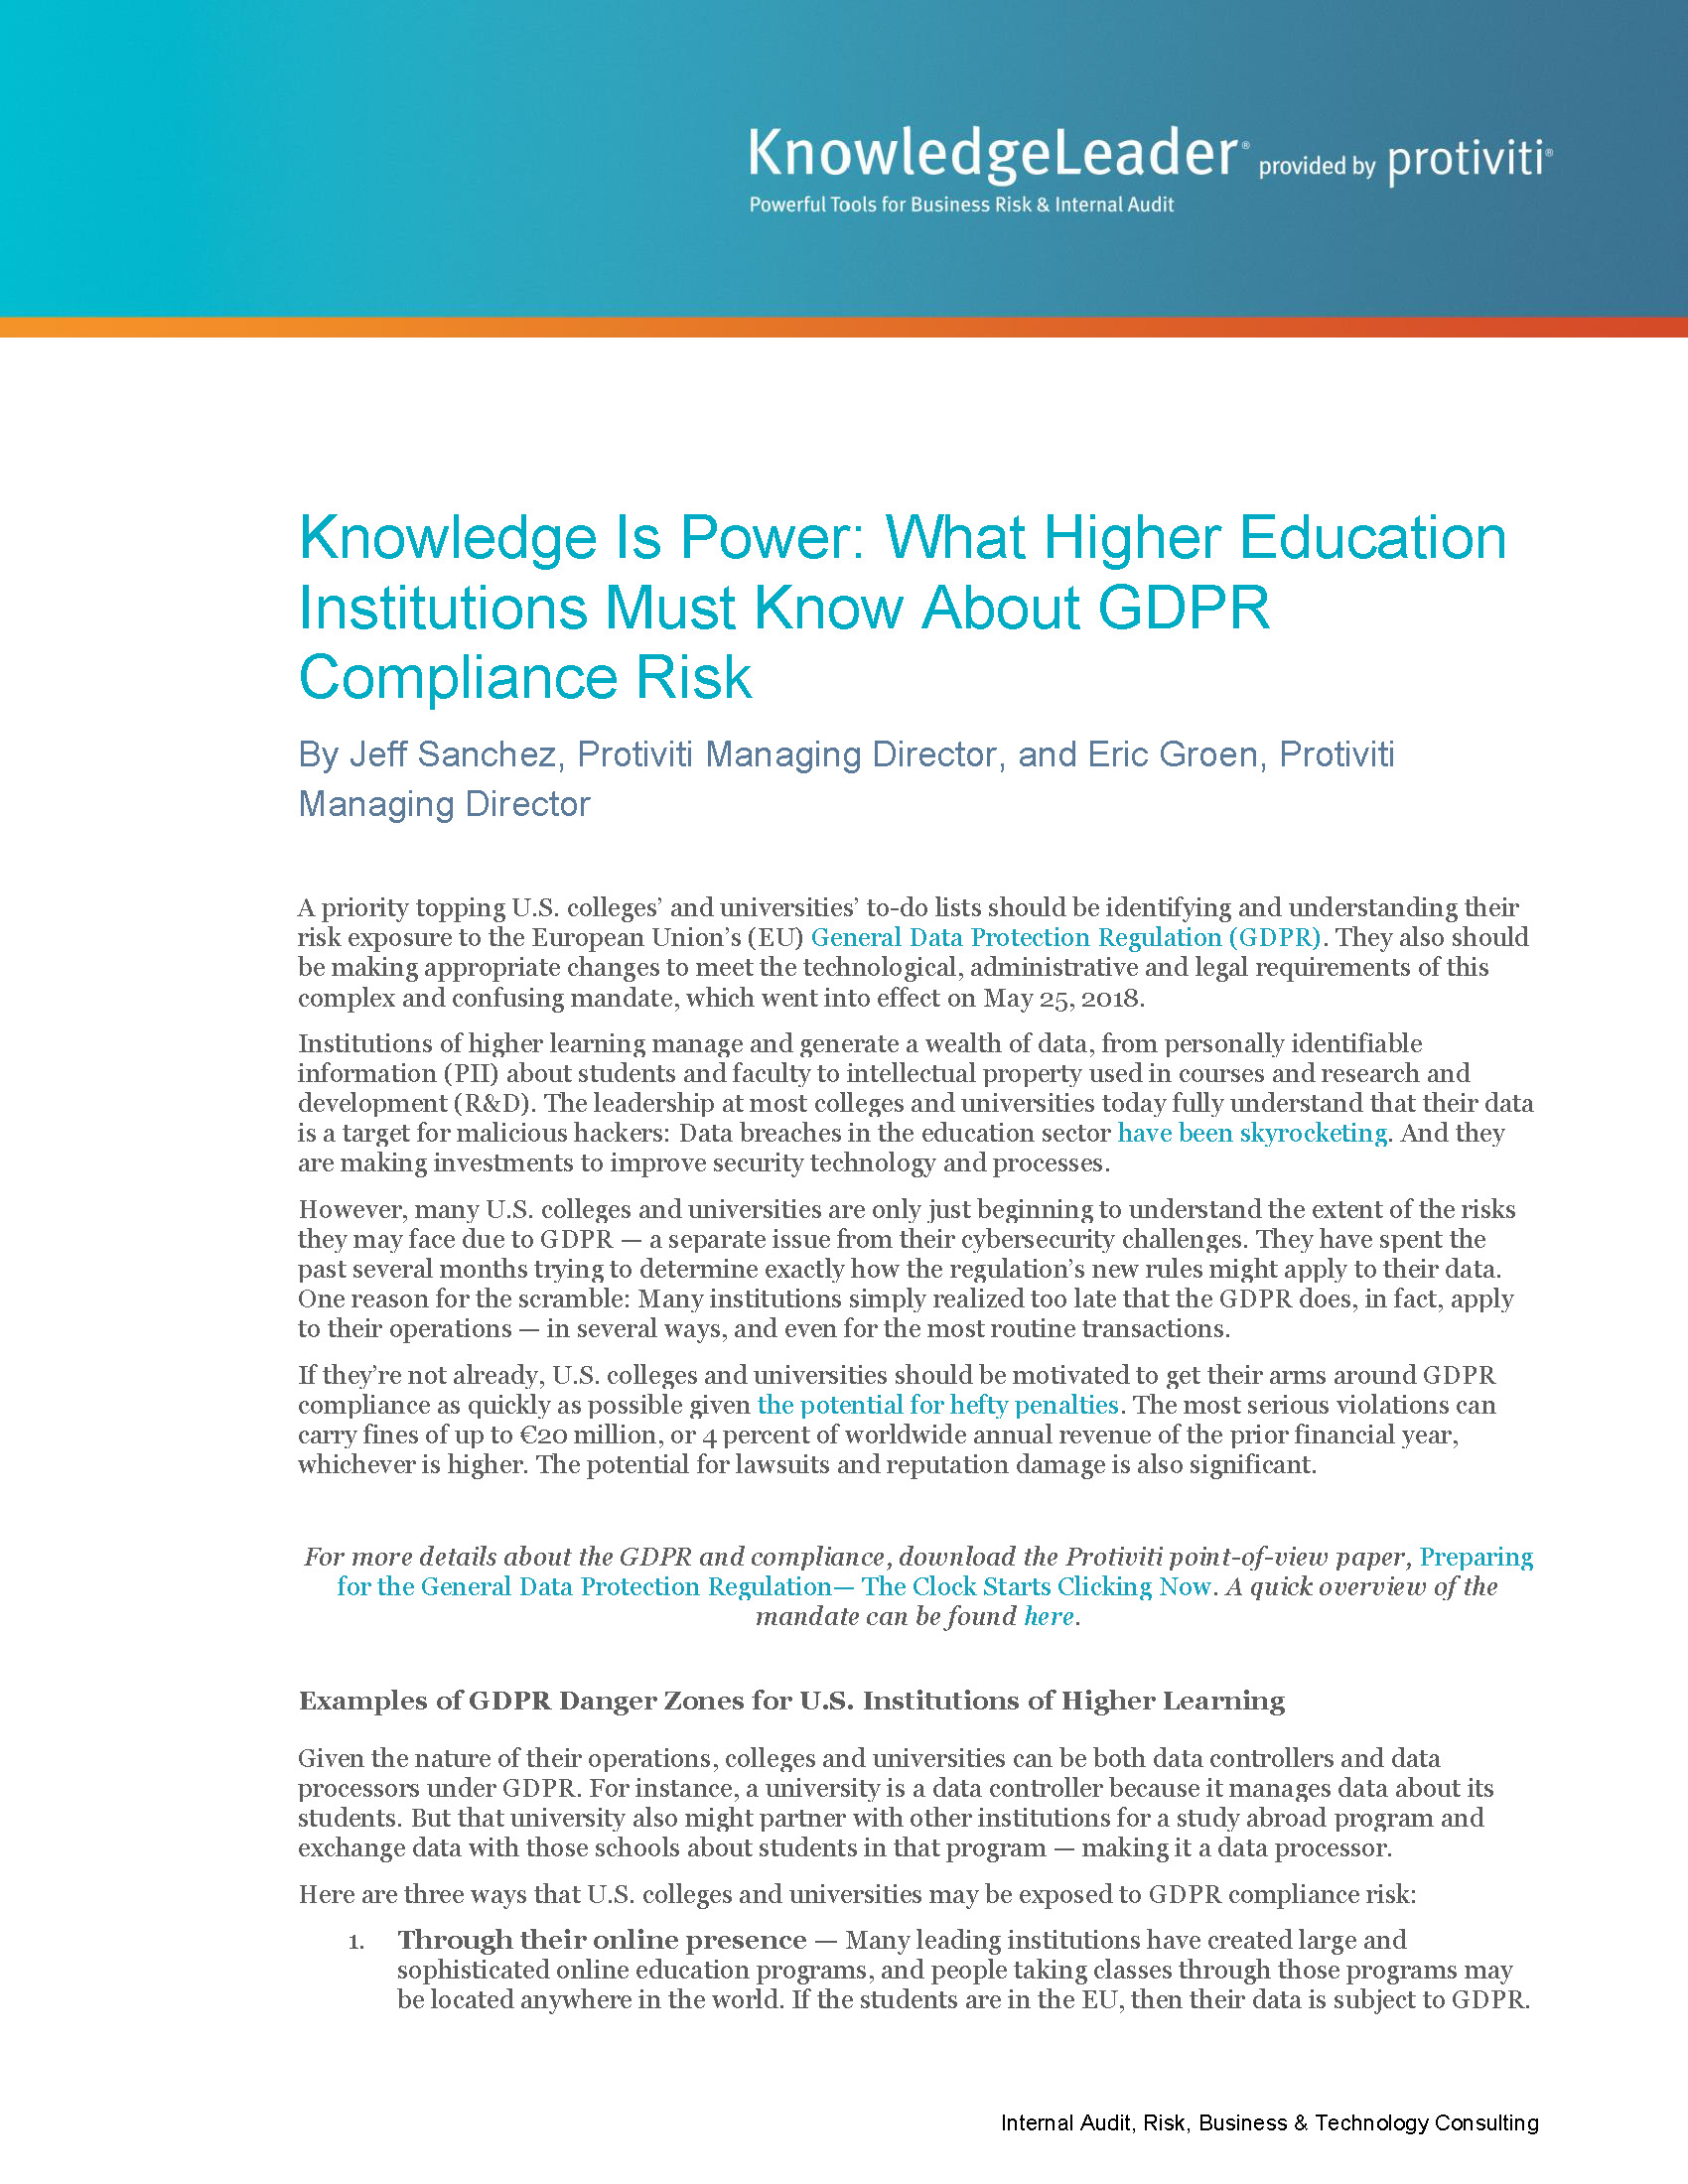 Screenshot of the first page of Knowledge Is Power-What Higher Education Institutions Must Know About GDPR Compliance Risk